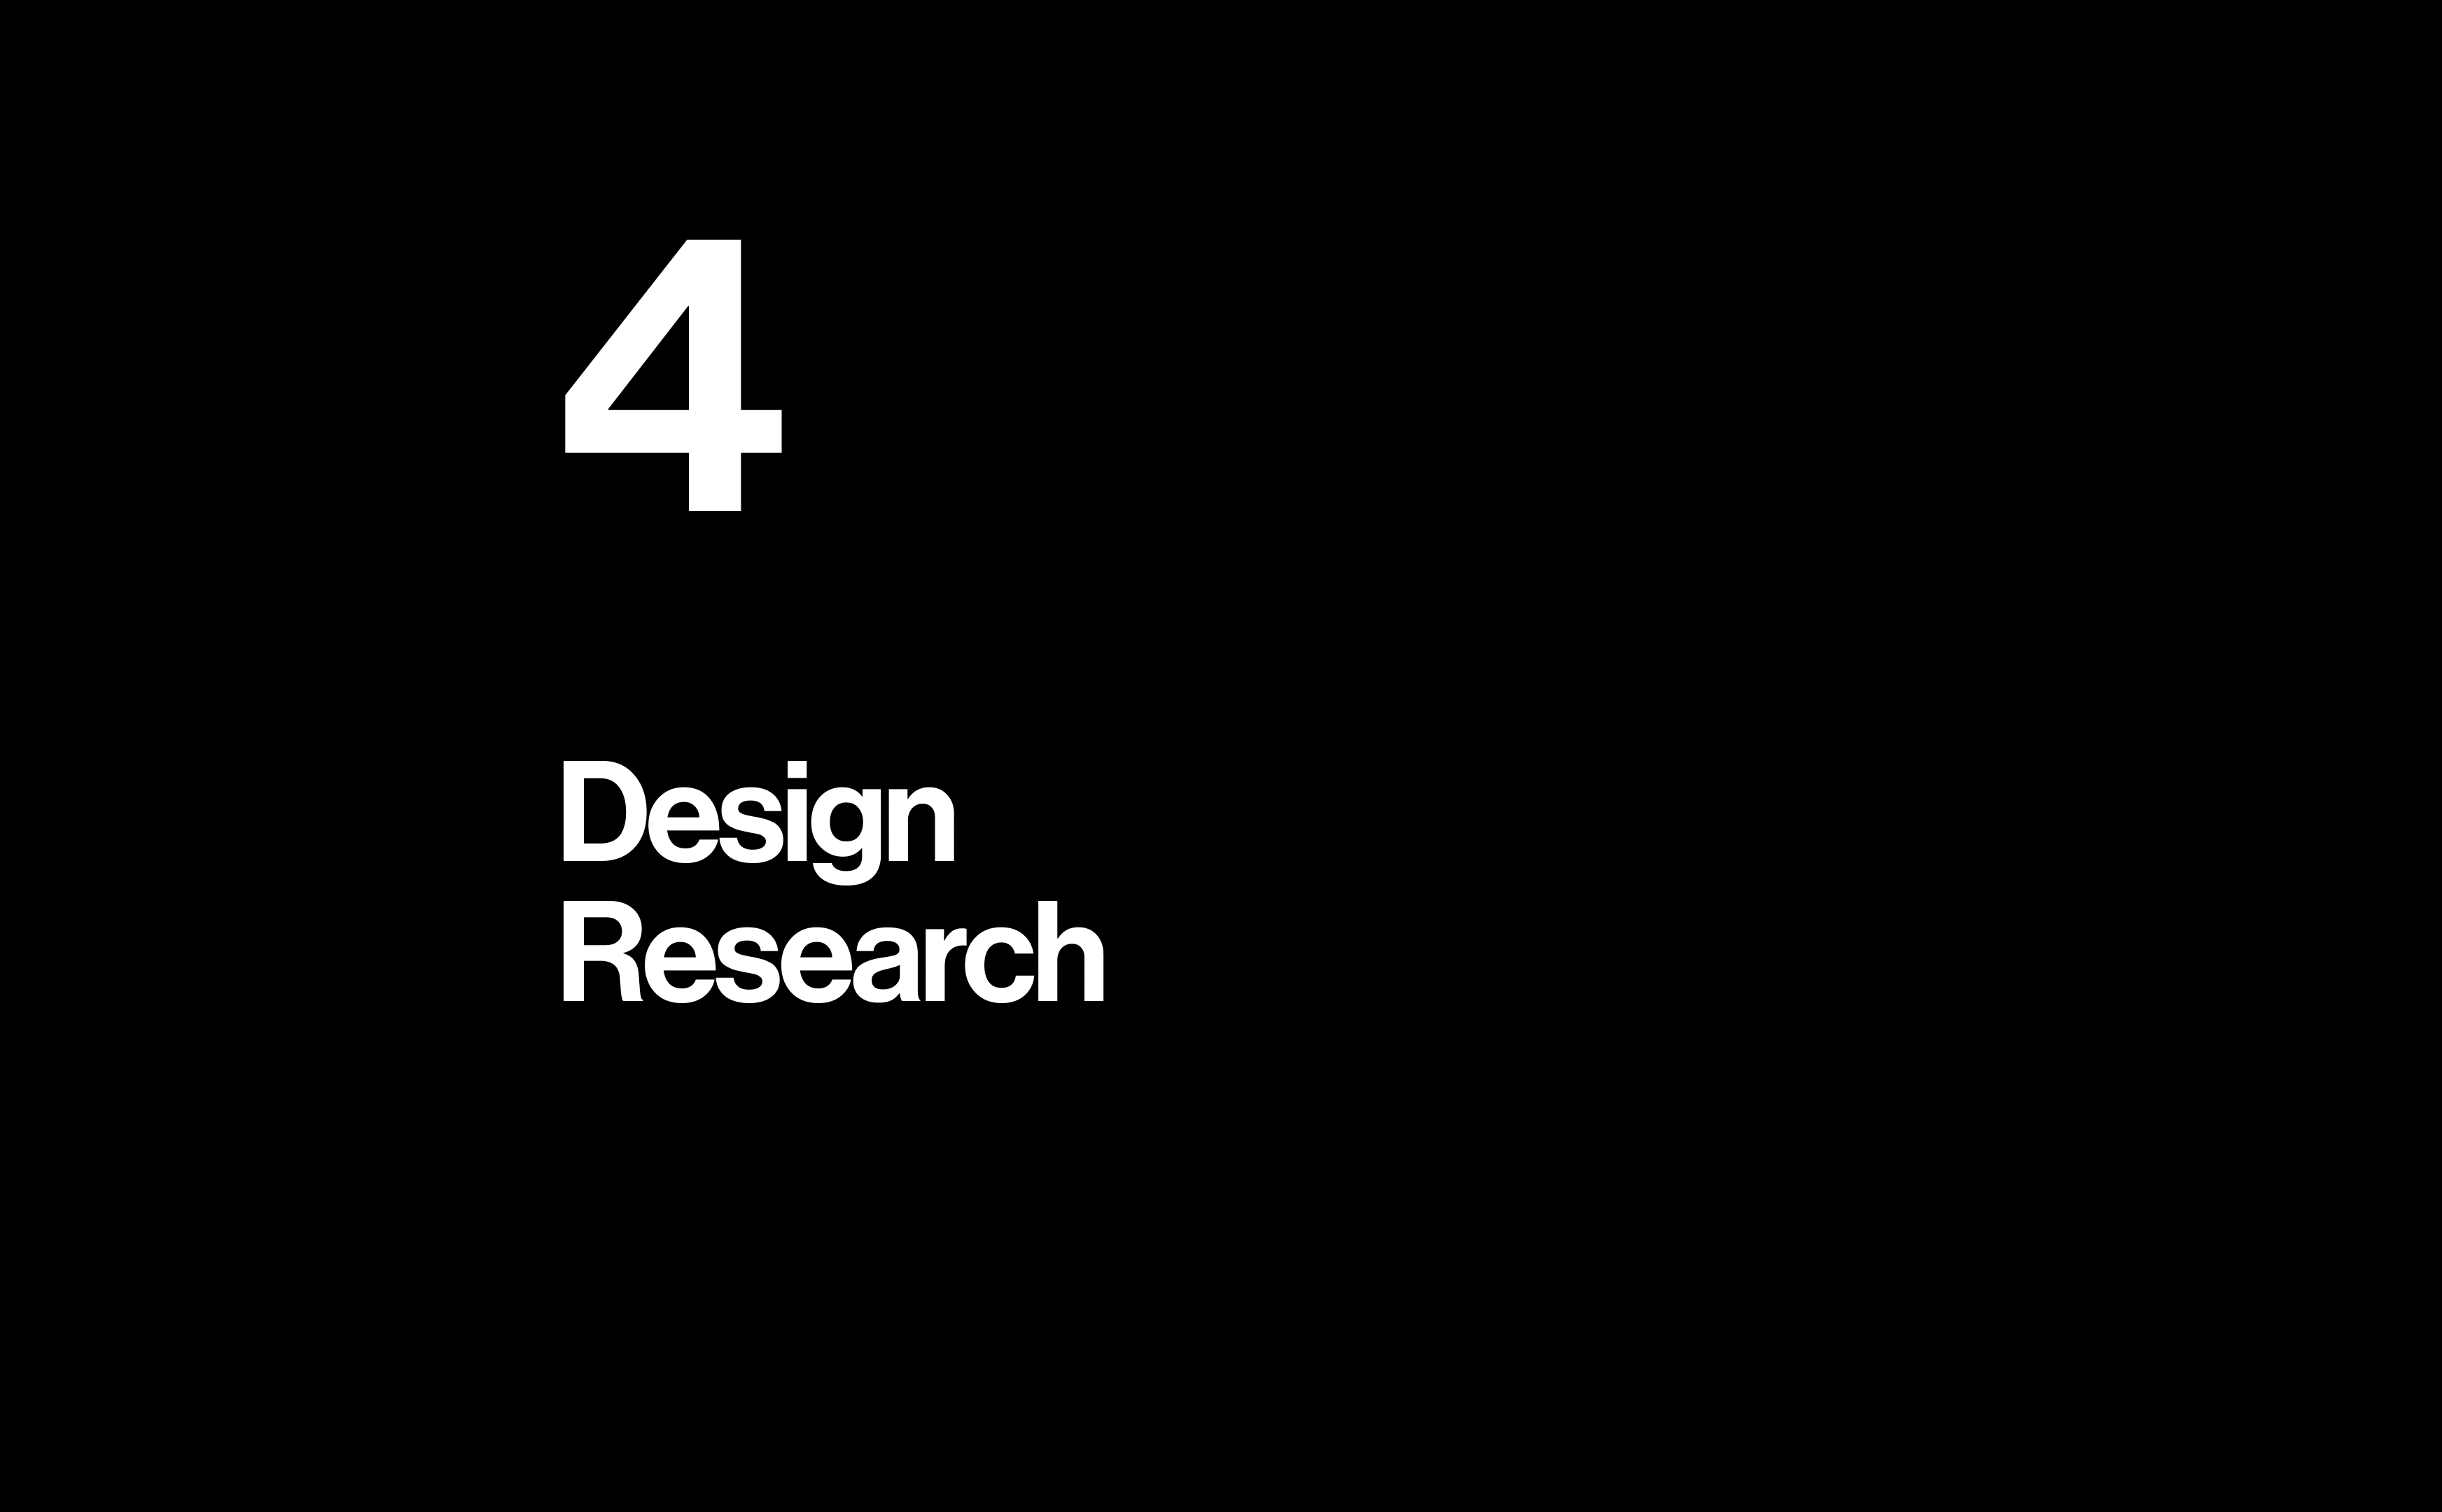 What does "design research" mean?